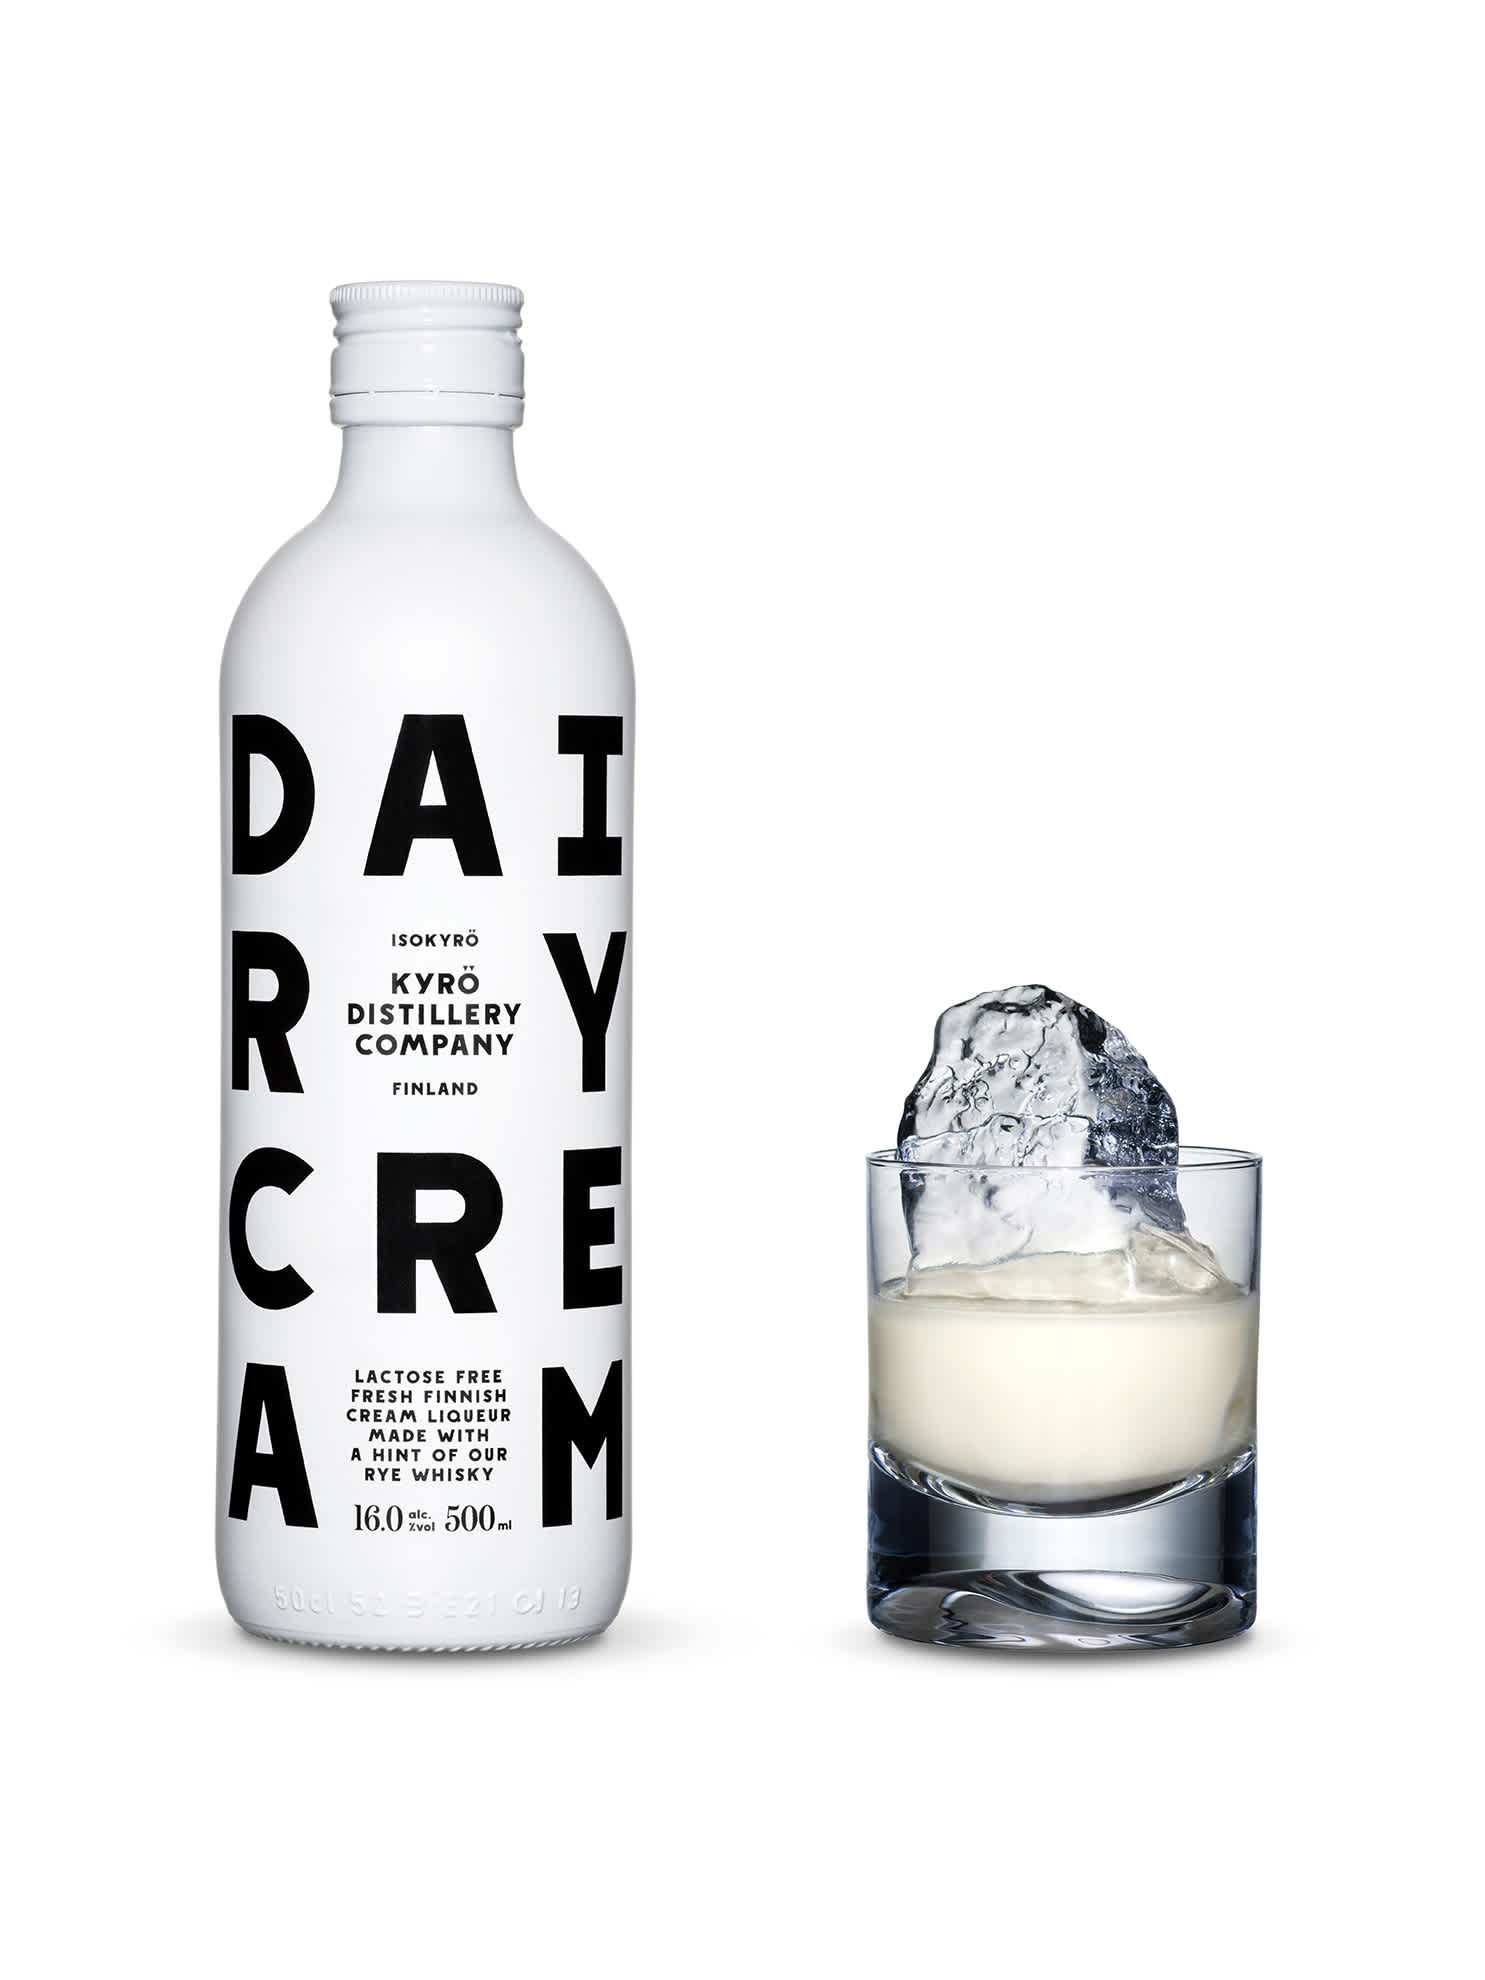 White, opaque bottles of Dairy Cream liquor with black font and Kyrö logo next to a tumbler glass filled with a shard of hand-cut ice and Dairy Cream liquor. Produced in Isokyrö, Finnland. 